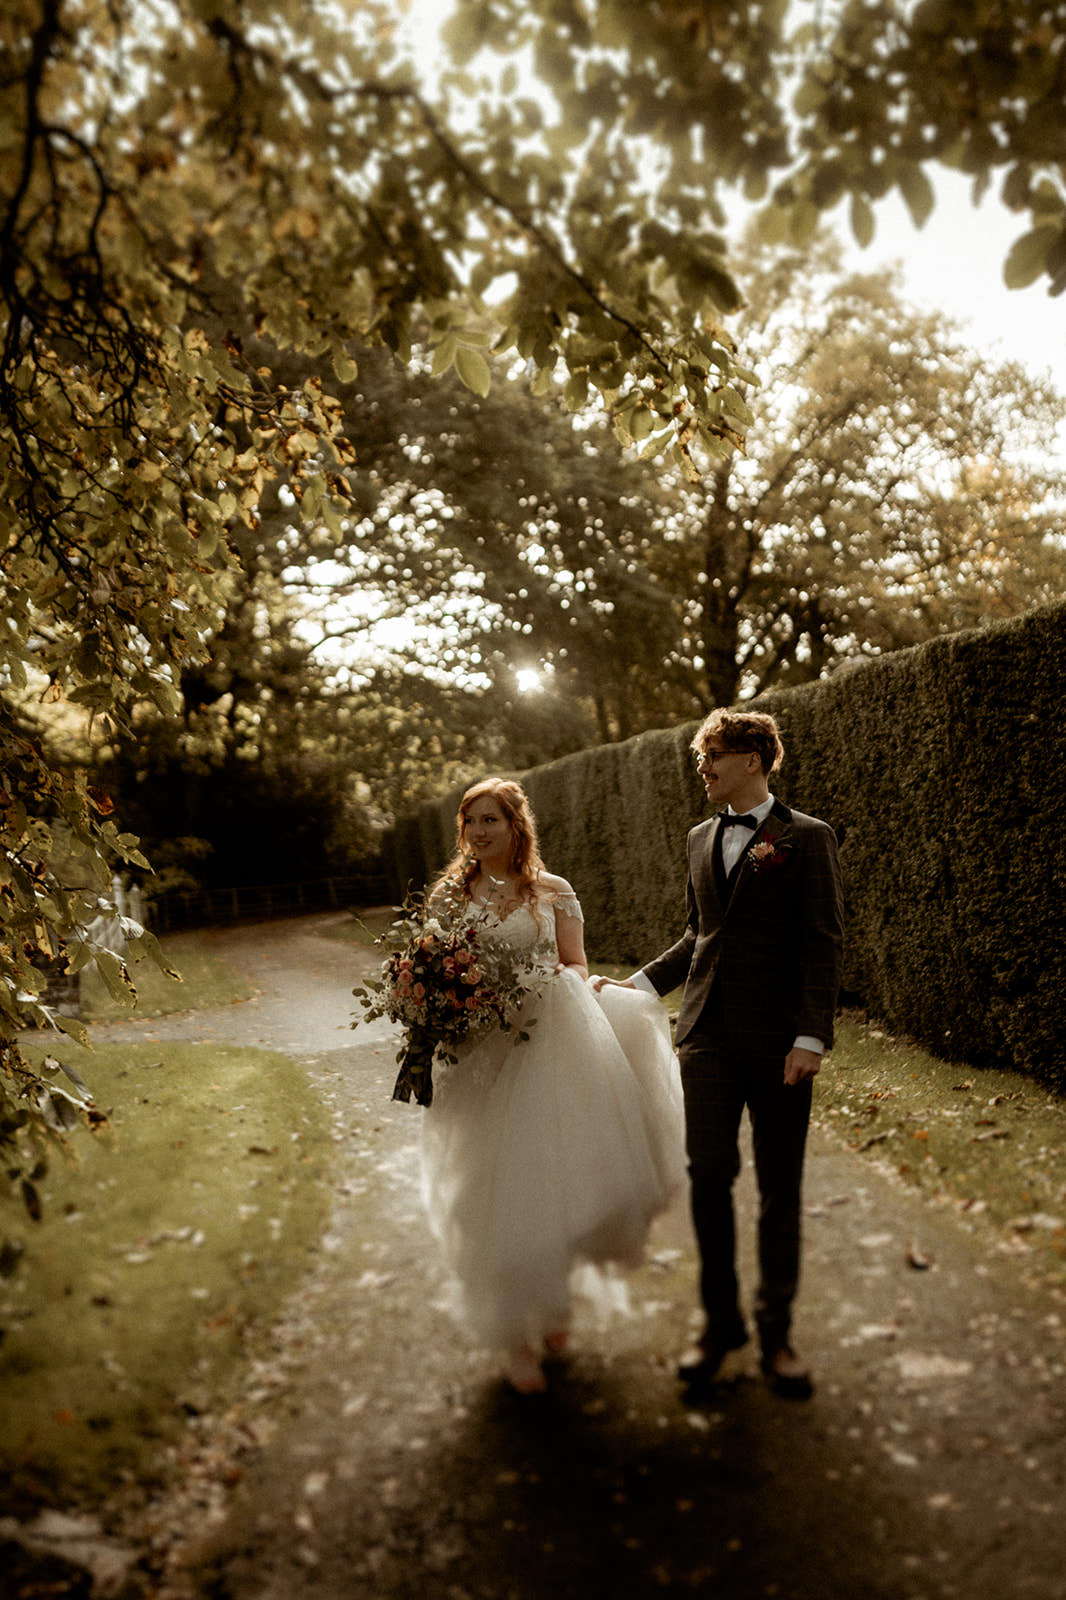 natural wedding photography in Wales | couple walking through the grounds at Treberfydd House